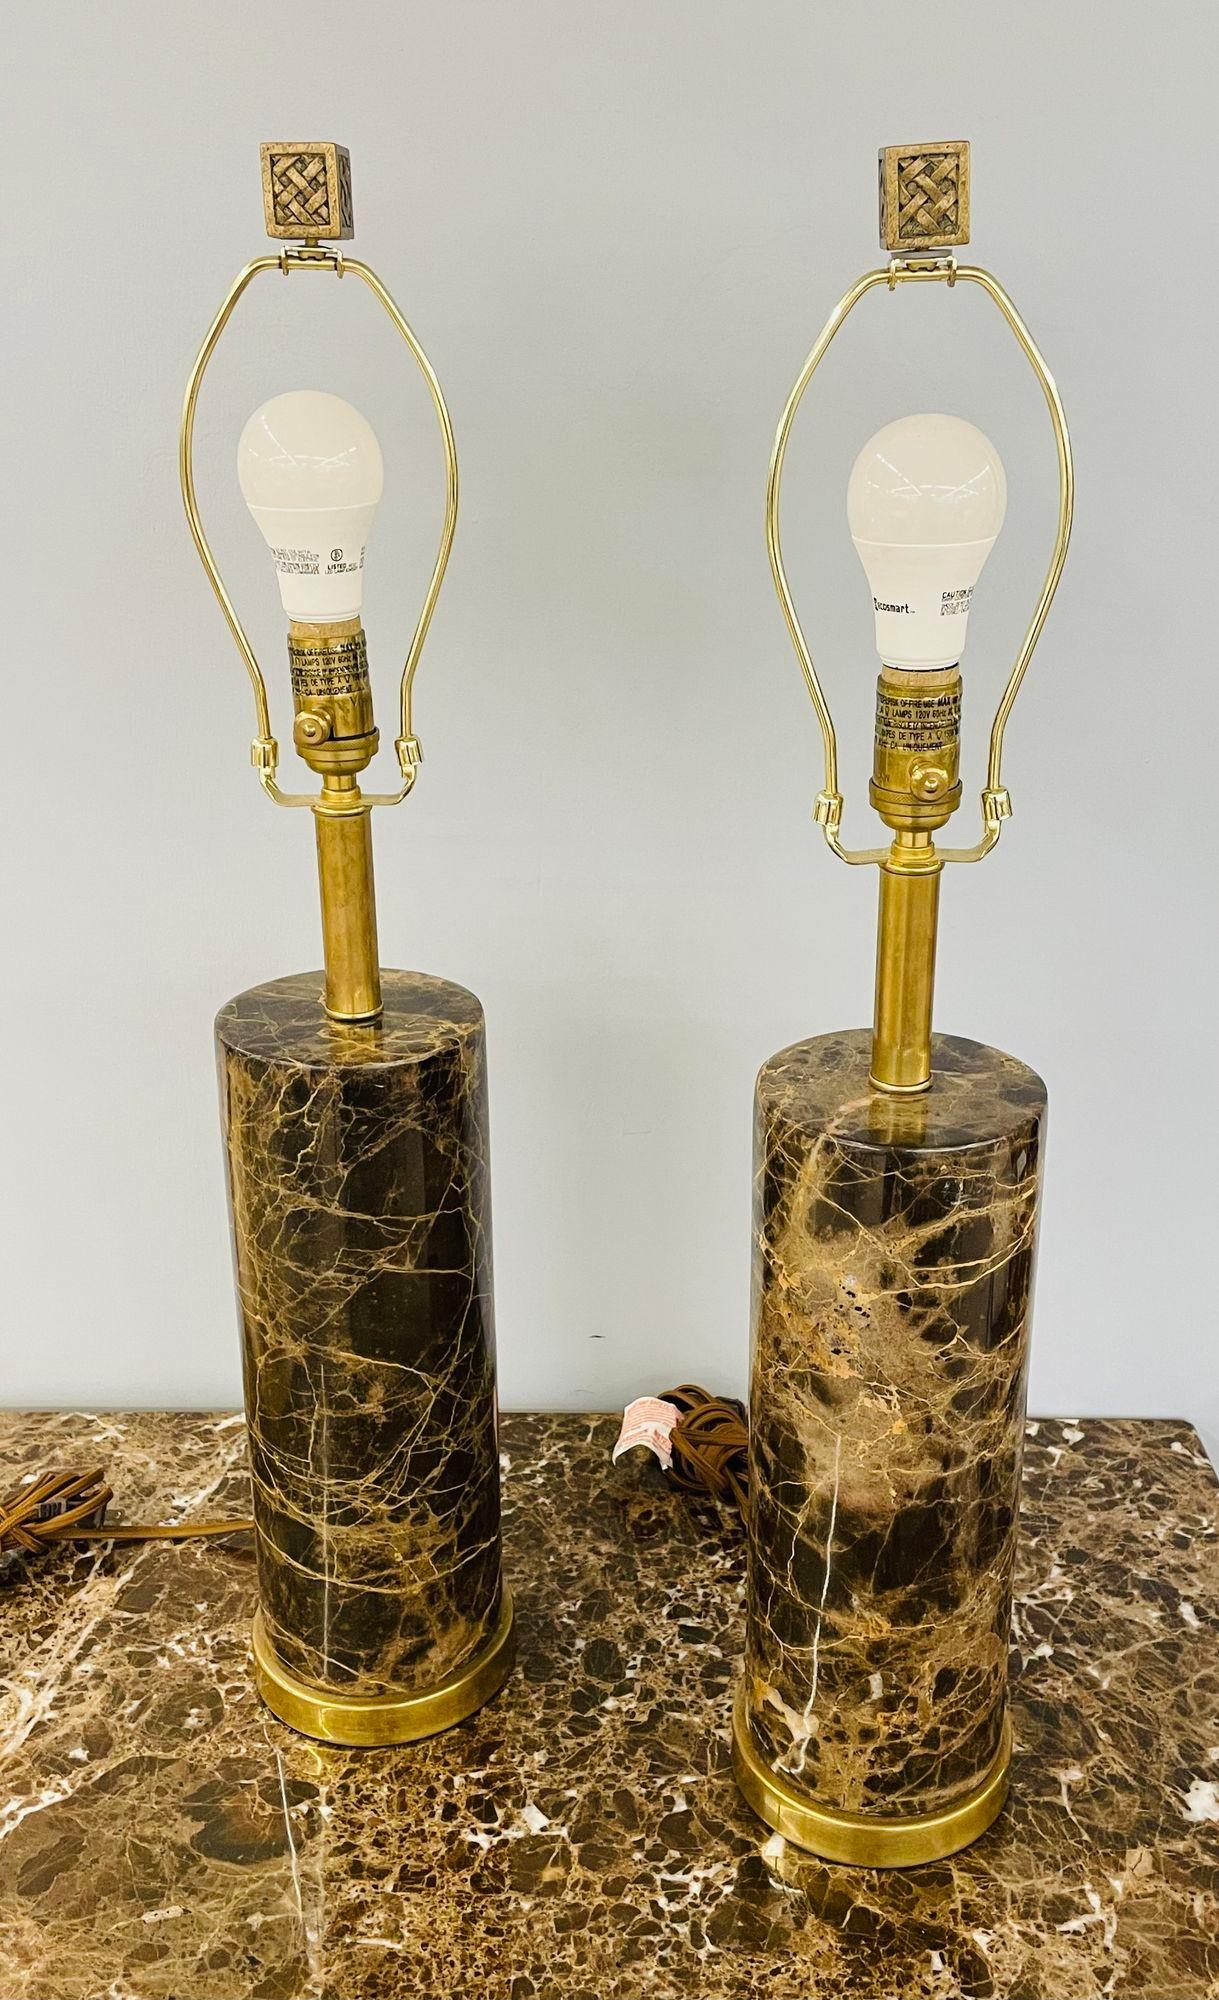 Pair of Modern Solid Marble Cylindrical Table Lamps, Brass Base, Single Bulb

Pair of brass base marble cylindrical form table lamps with finials in the Art Deco fashion. Shades are not included. Six pair available.

29.75